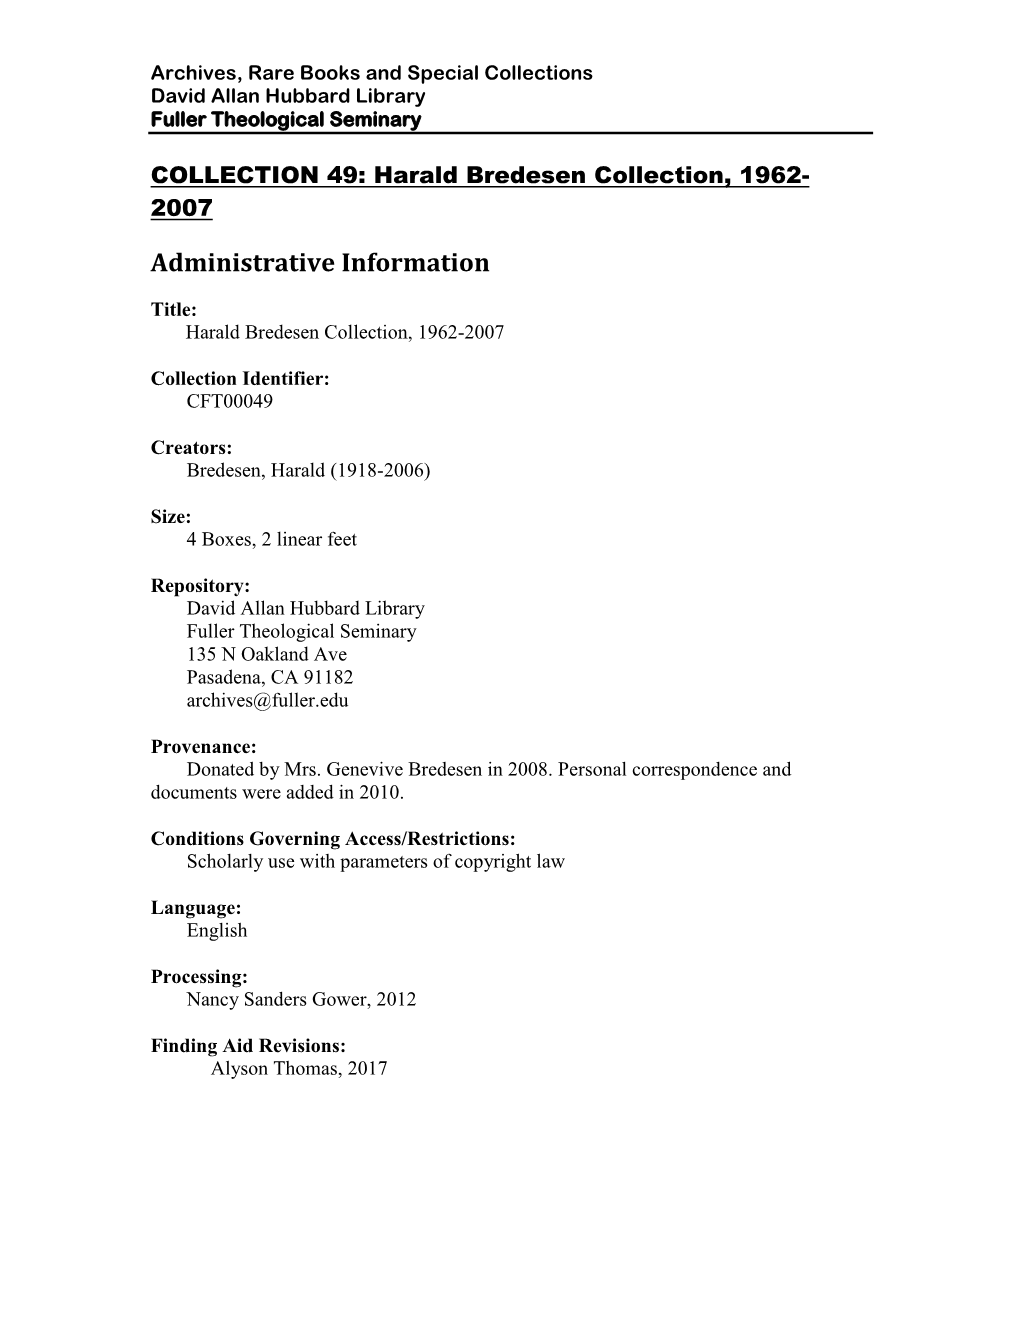 Finding Aid for Harald Bredesen Collection